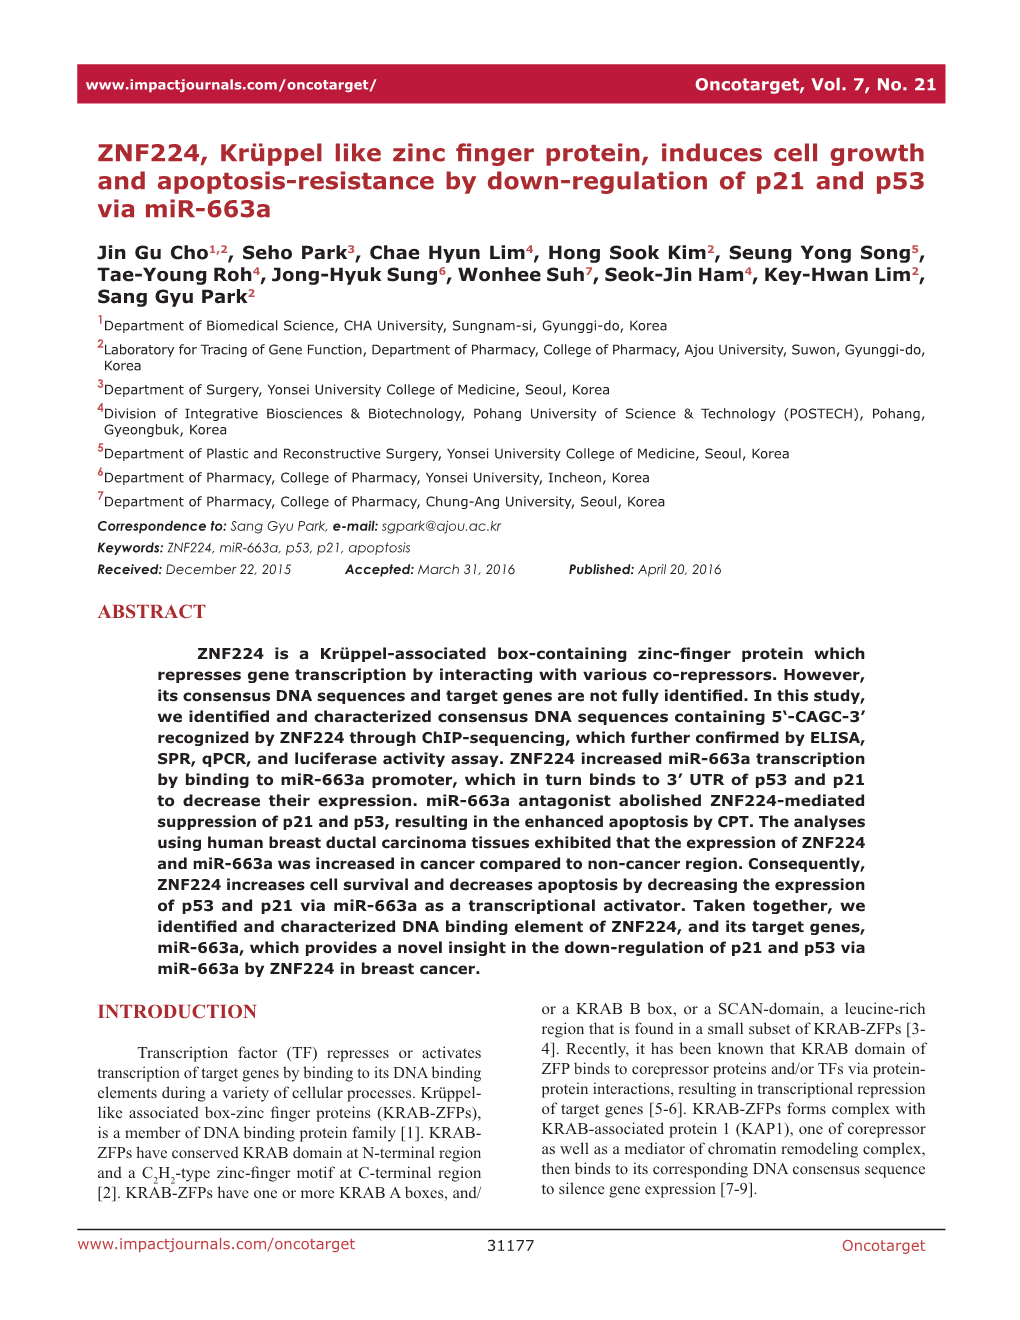 ZNF224, Krüppel Like Zinc Finger Protein, Induces Cell Growth and Apoptosis-Resistance by Down-Regulation of P21 and P53 Via Mir-663A